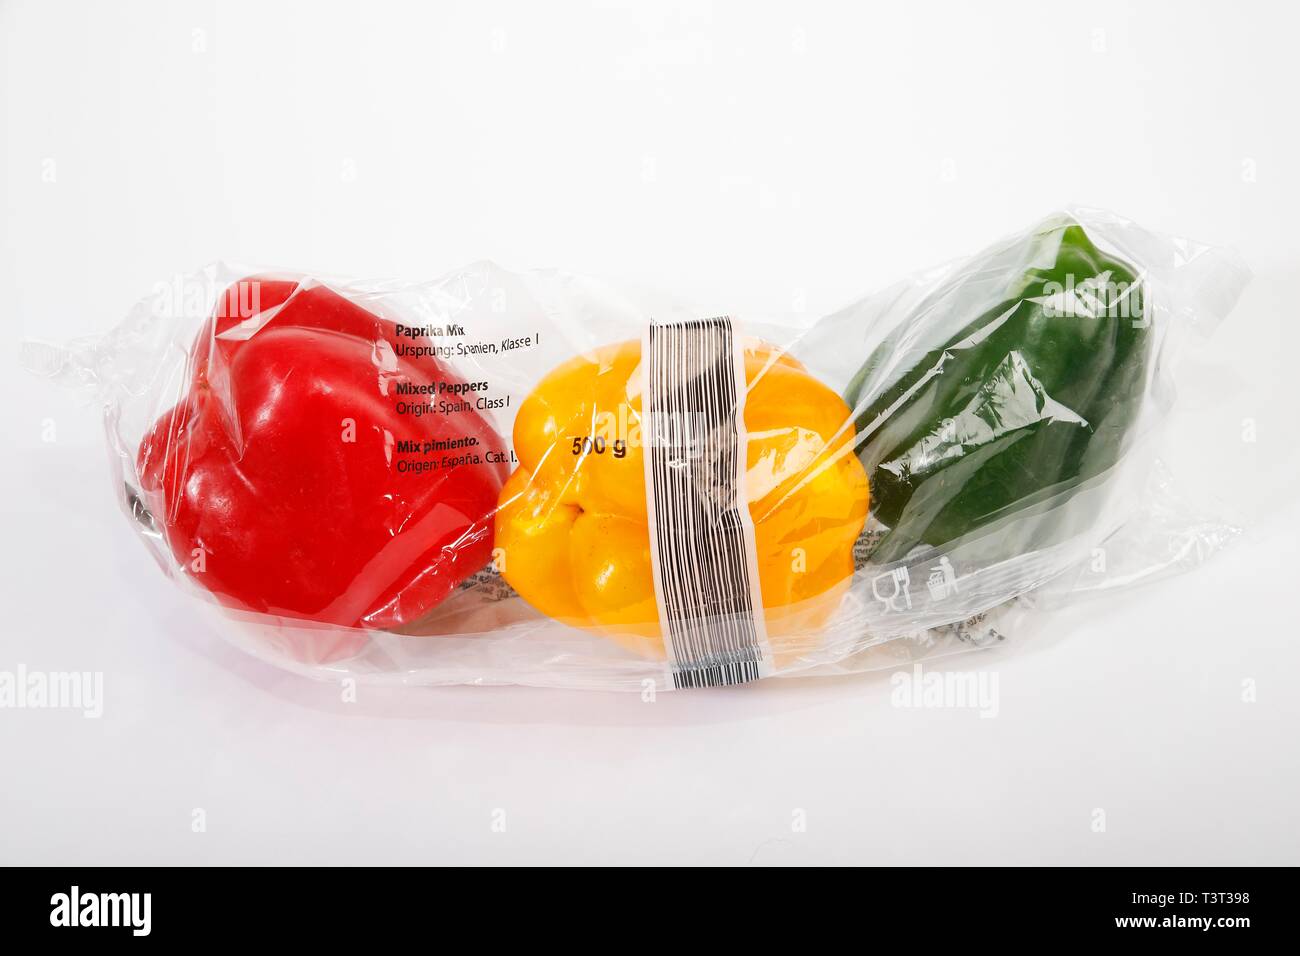 Red, yellow and green peppers (Capsicum annuum) from the supermarket  shrink-wrapped in plastic, vegetables in plastic packaging, plastic waste  Stock Photo - Alamy